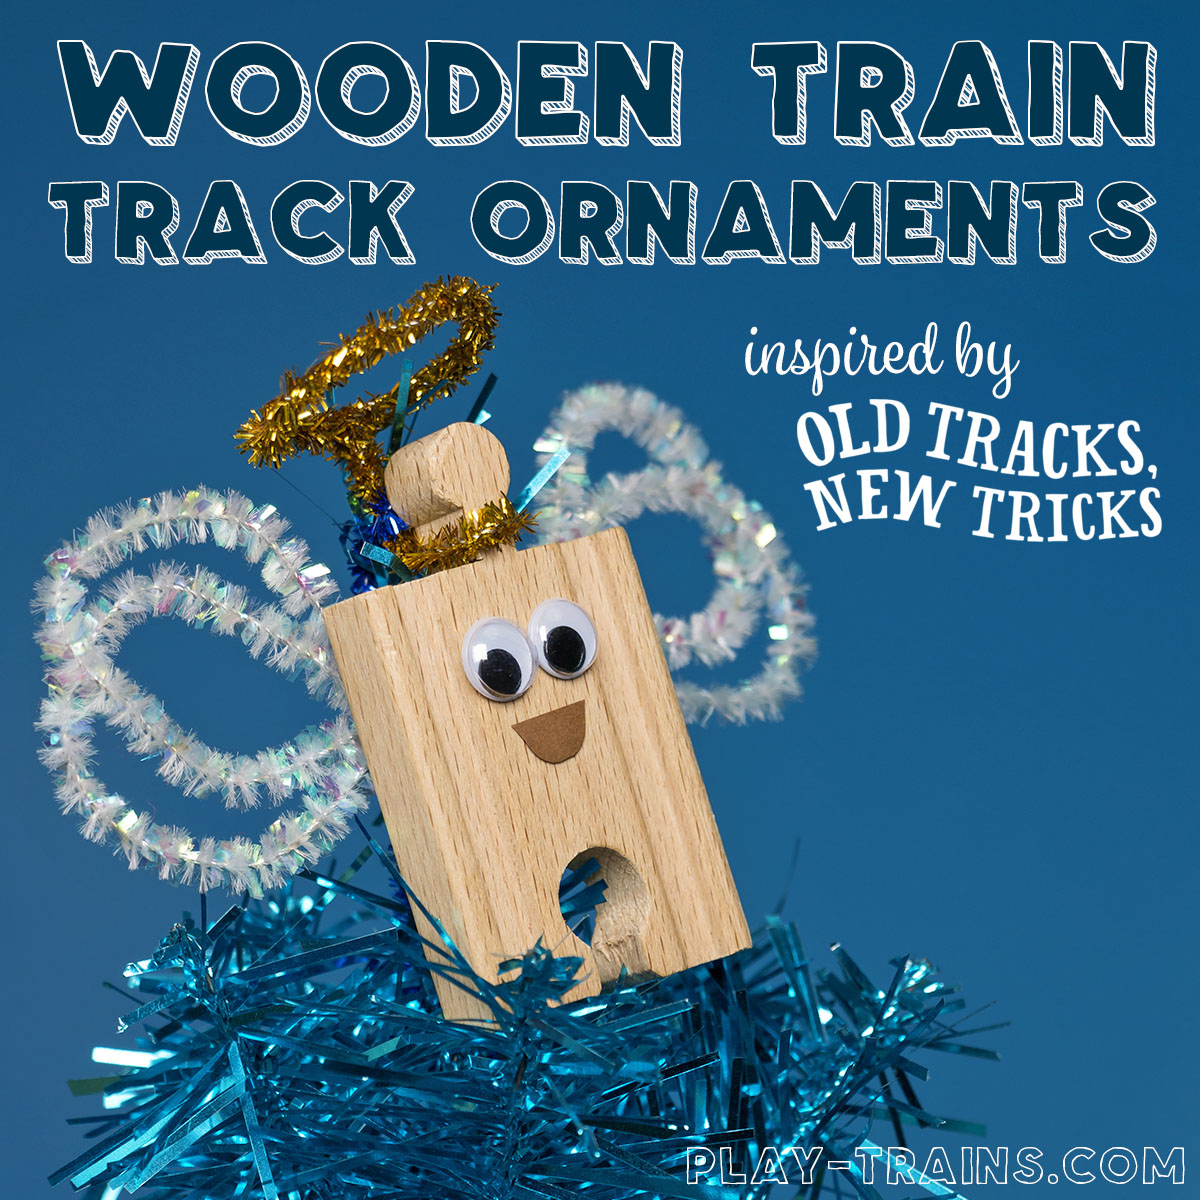 DIY wooden train track Christmas ornaments inspired by OLD TRACKS, NEW TRICKS by Jessica Petersen. The decorations are temporary so the tracks can go back to the train set after the holidays!